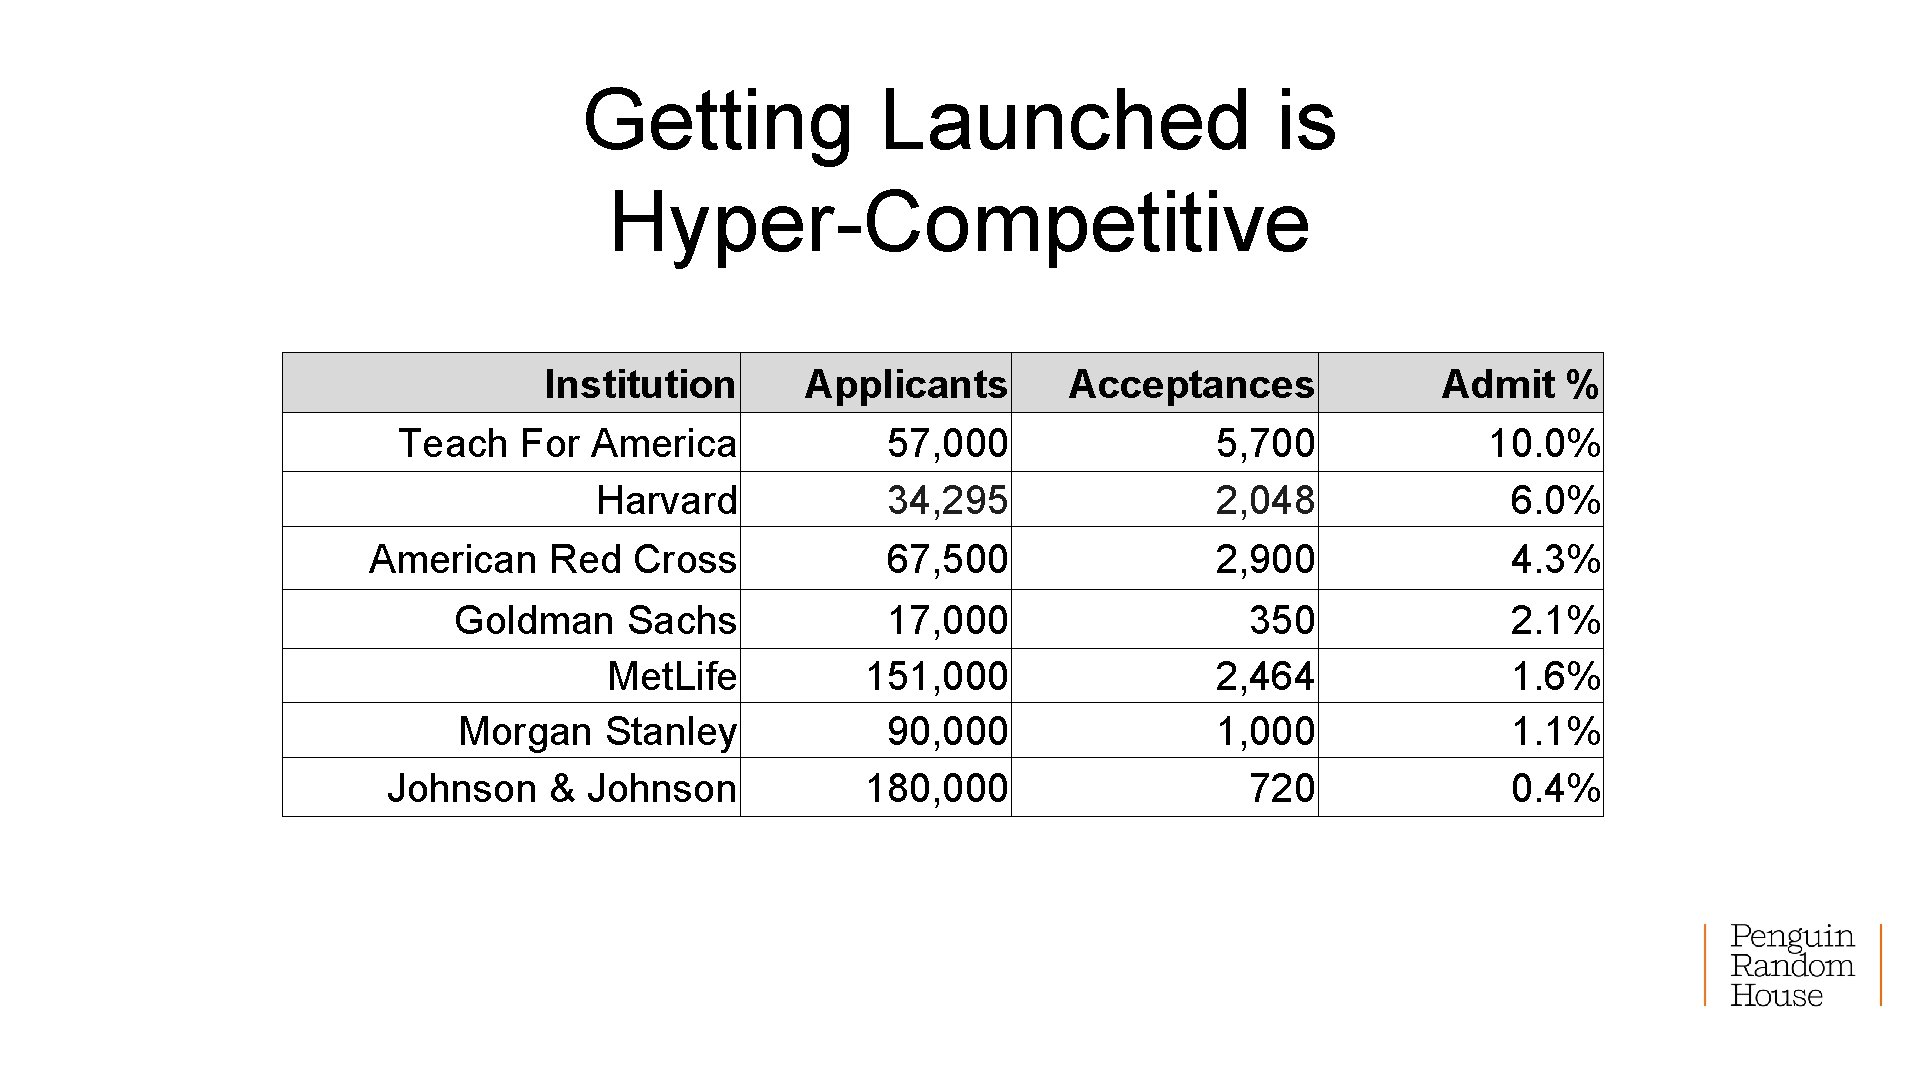 Getting Launched is Hyper-Competitive Institution Teach For America Harvard American Red Cross Applicants 57,